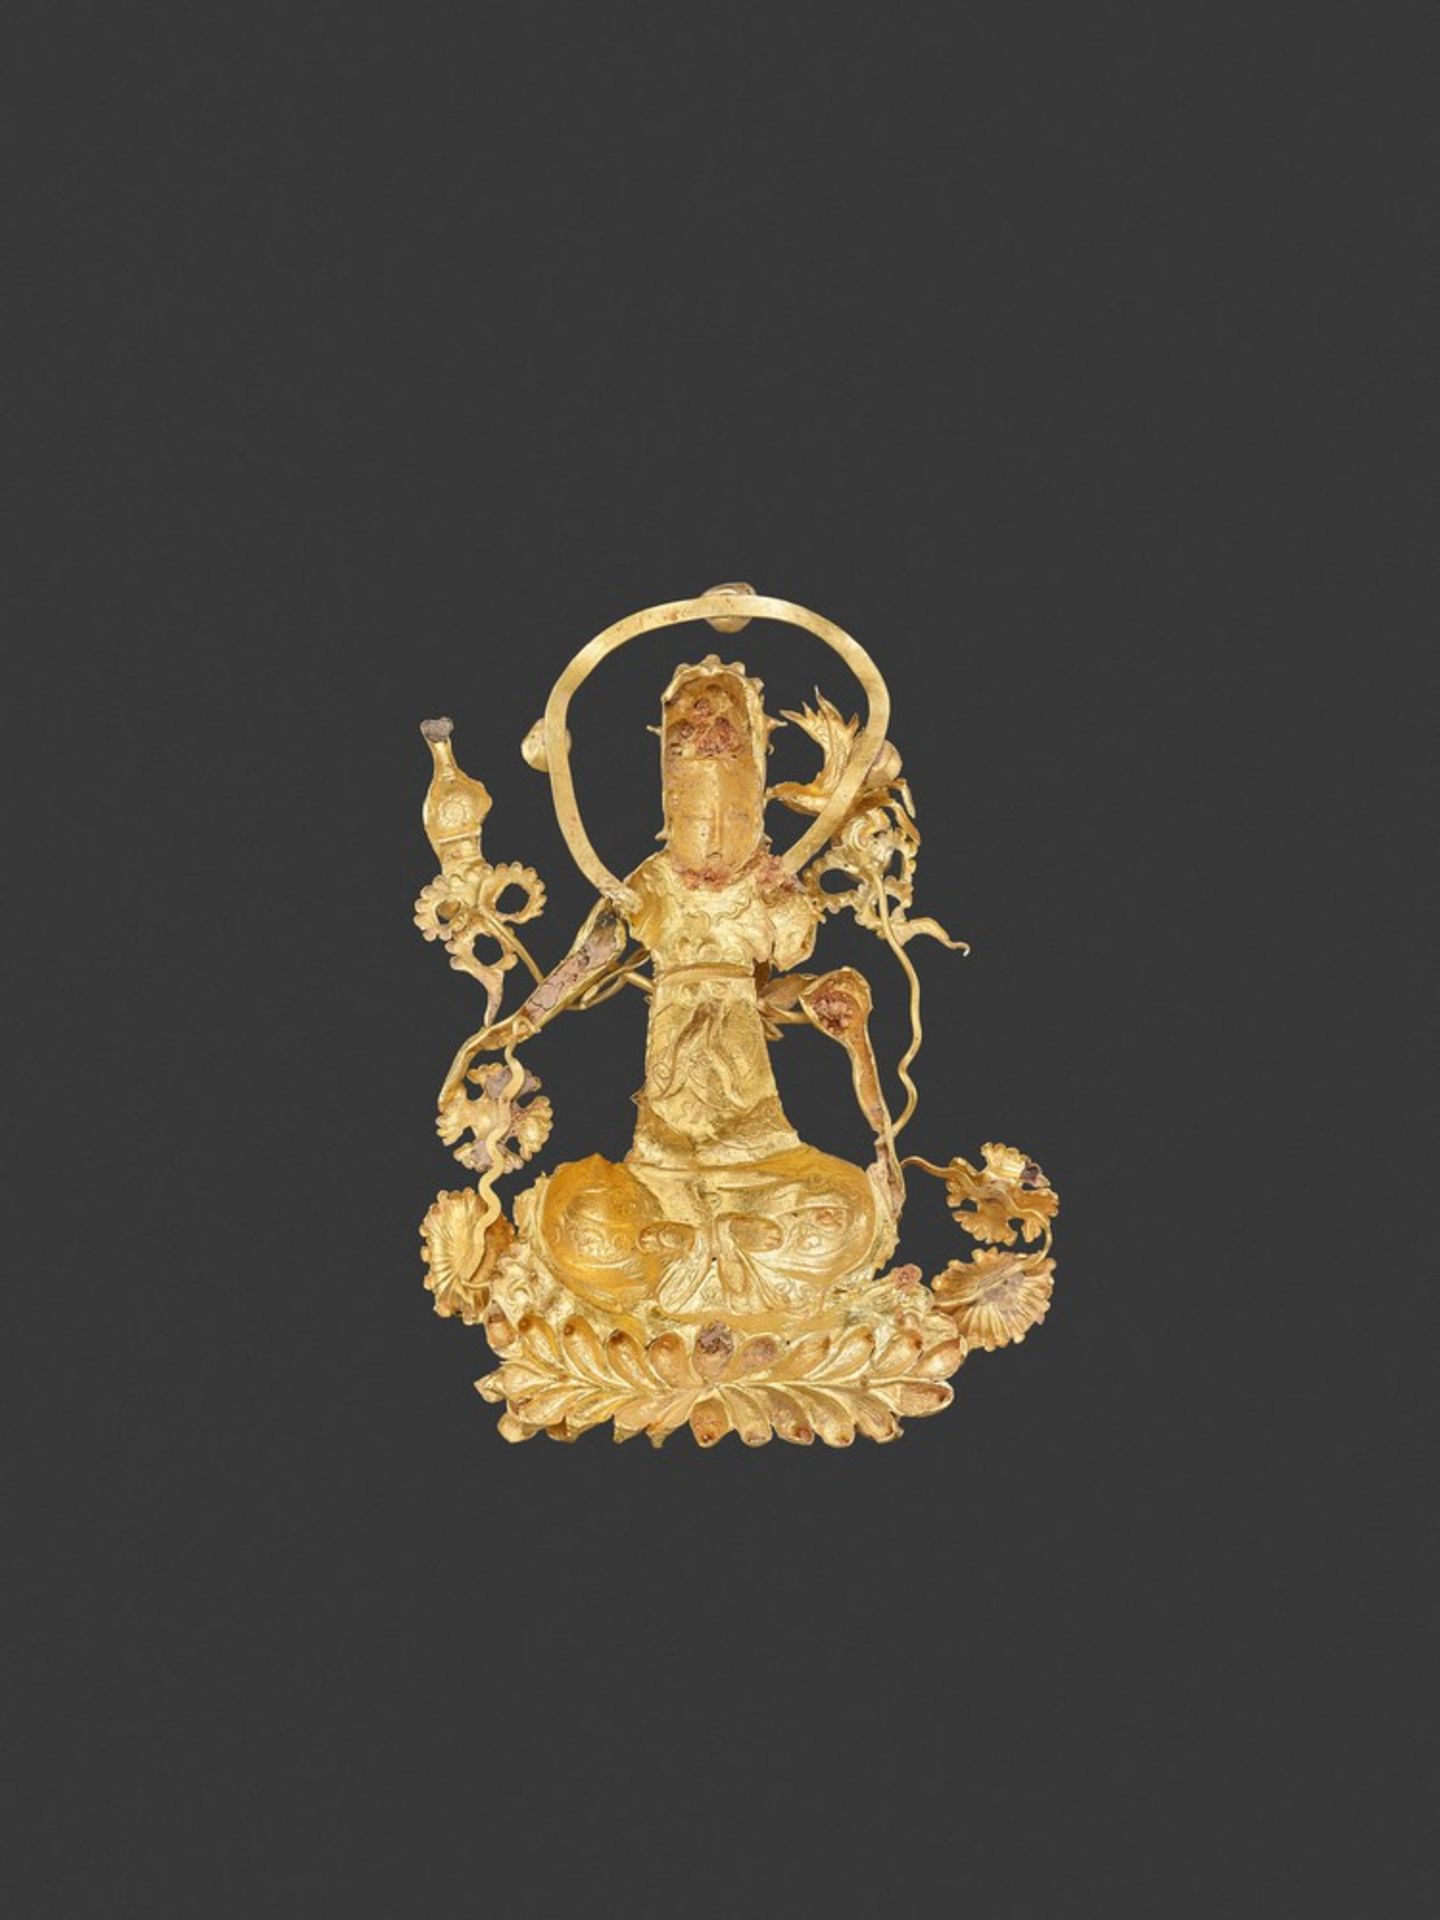 A LIAO DYNASTY GOLD REPOUSSÉ 'GUANYIN' FILIGREE ORNAMENT China, 916-1125. The Goddess of Mercy - Image 5 of 9